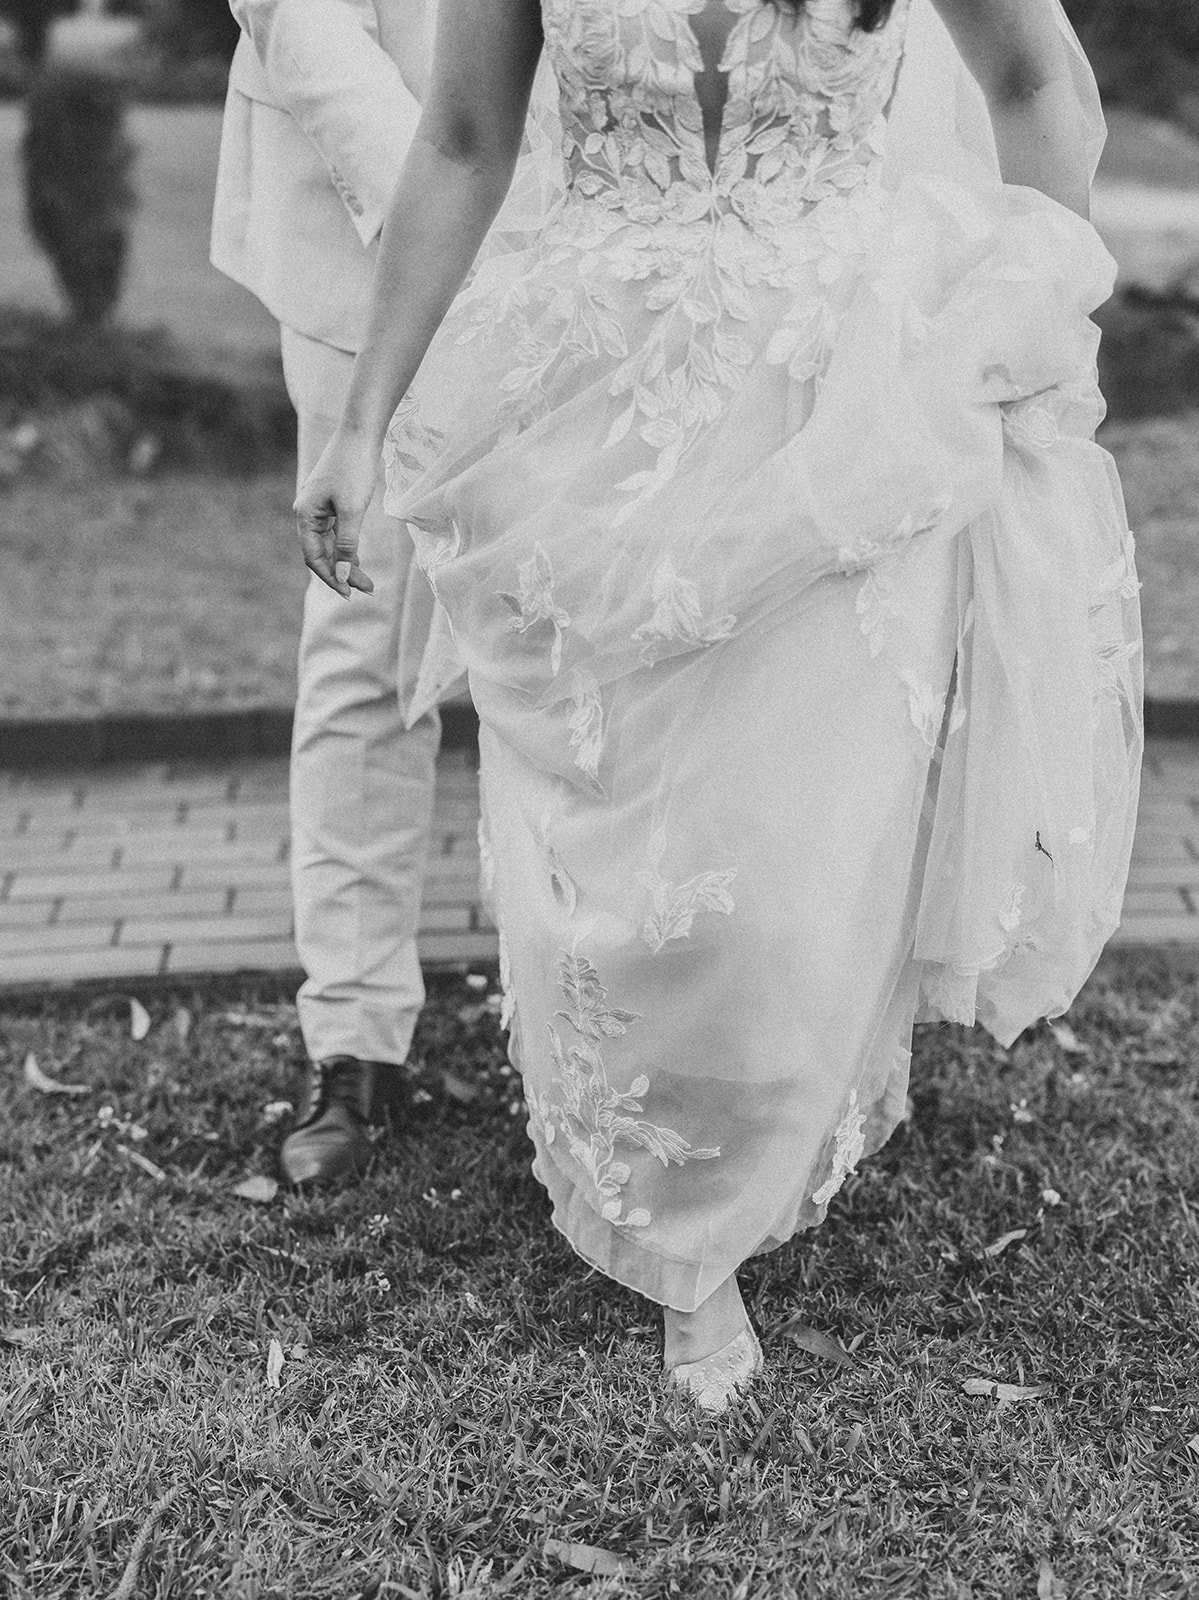 Black and white photograph of a bride holding her gown